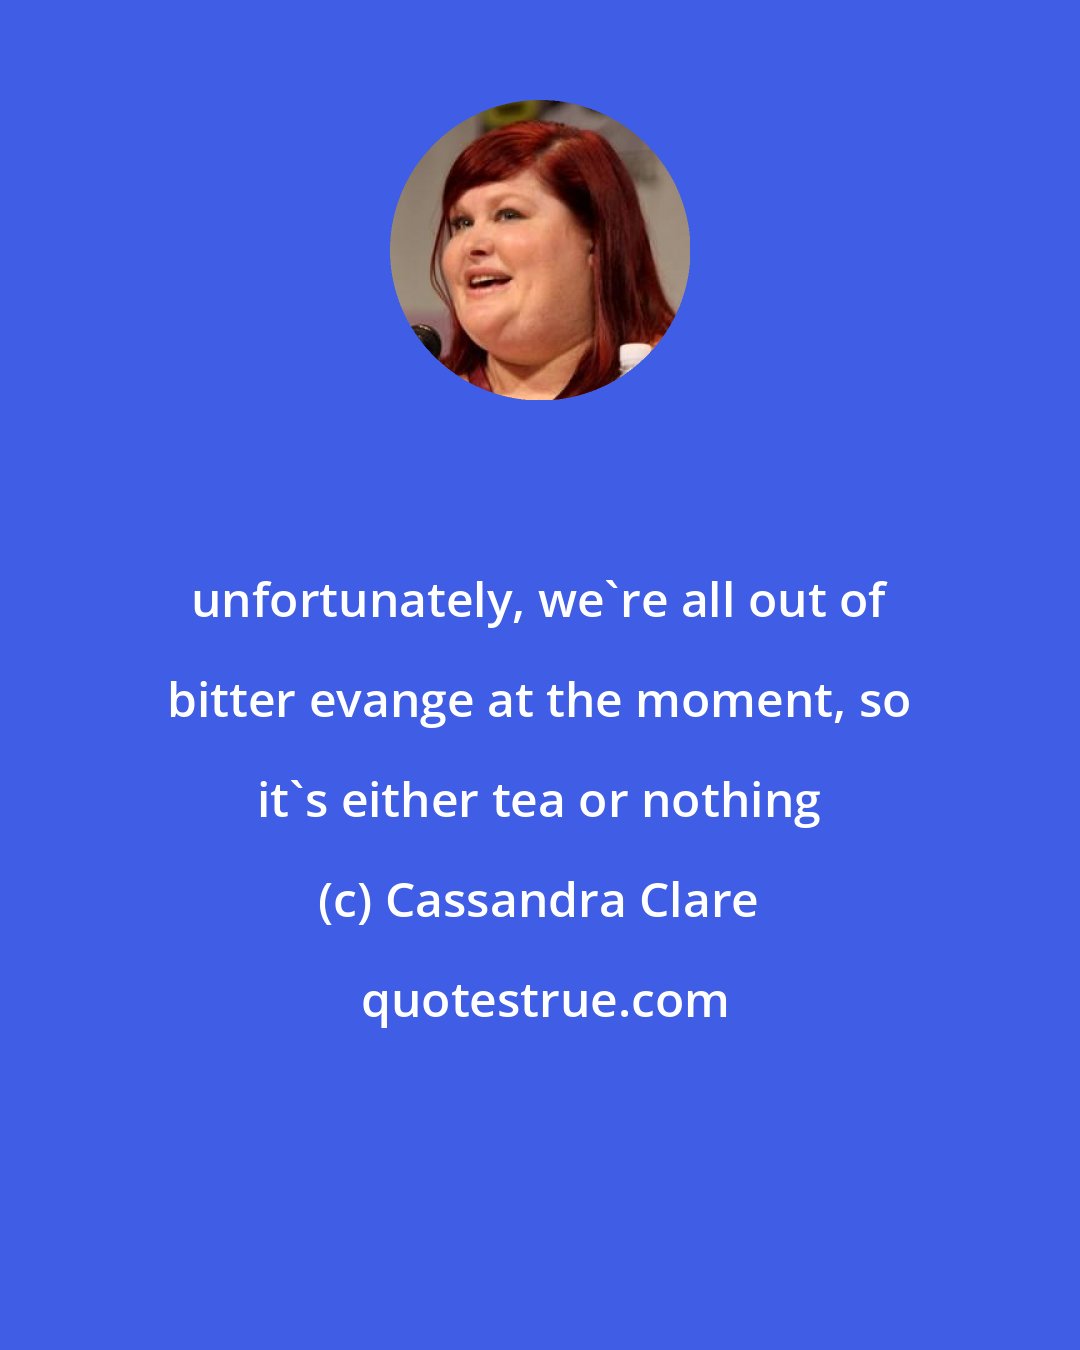 Cassandra Clare: unfortunately, we're all out of bitter evange at the moment, so it's either tea or nothing